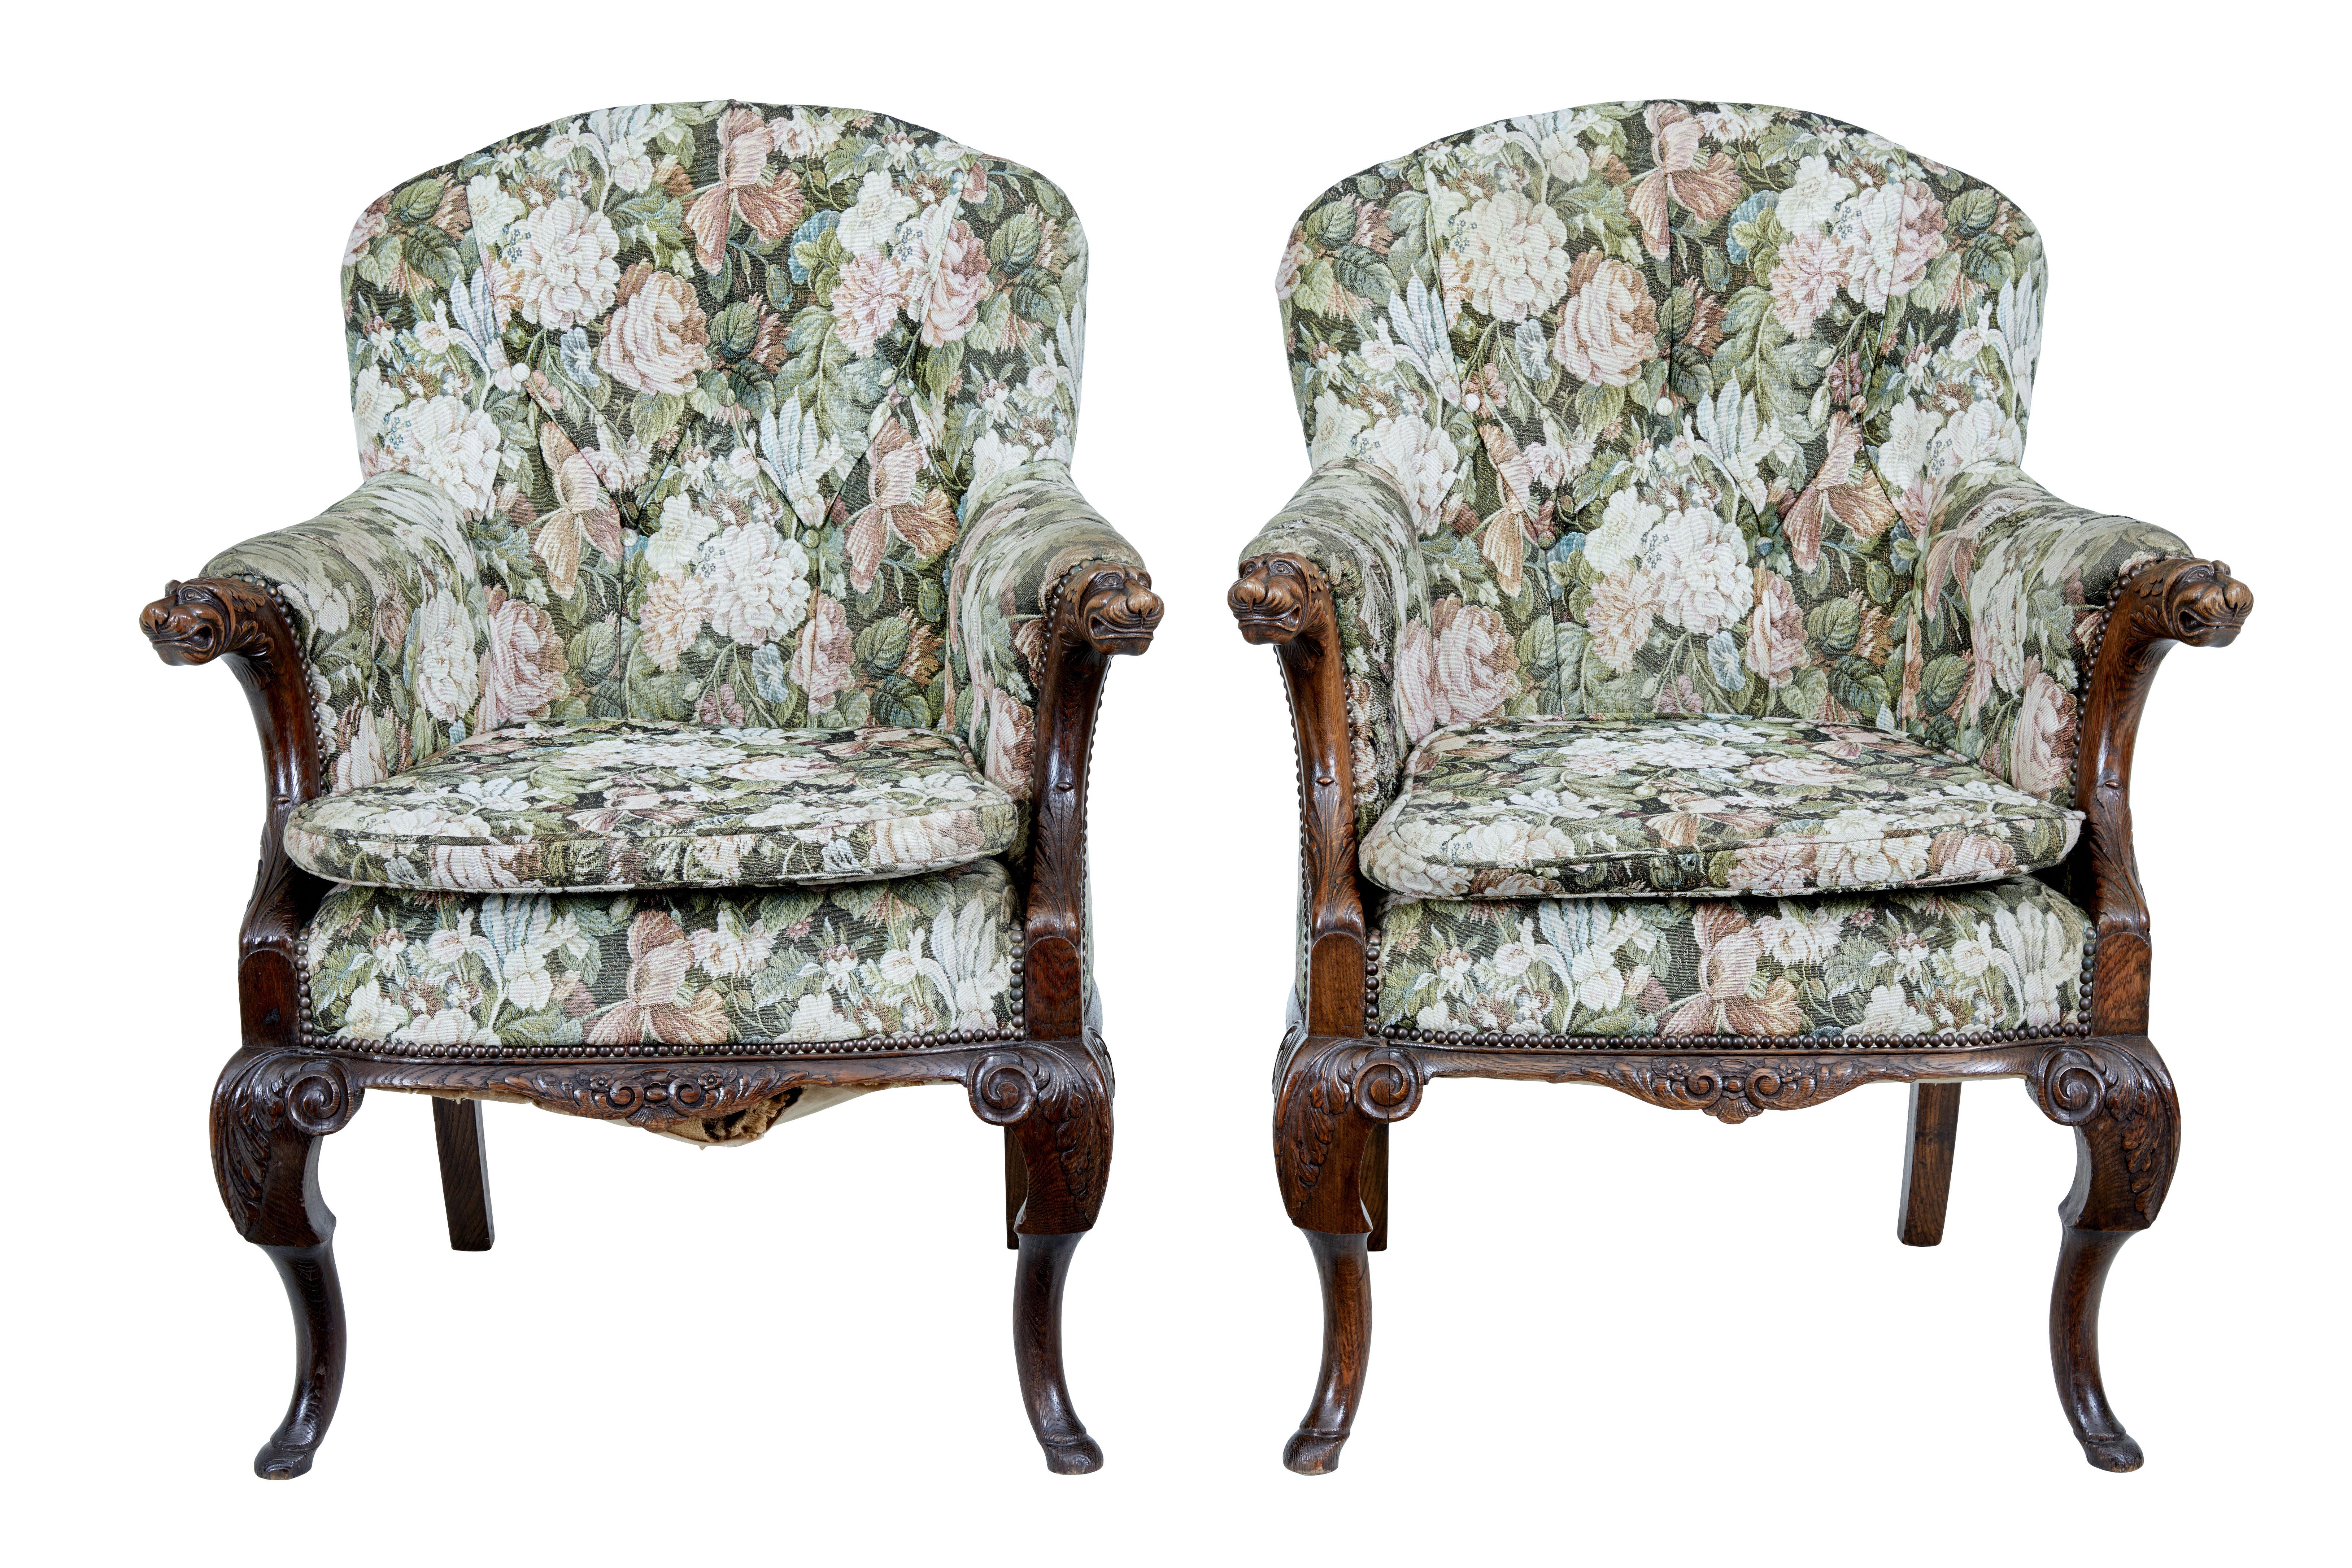 Pair of french 19th century carved oak armchairs circa 1870.

Fine quality pair of profusely carved armchairs. Shaped backs with upholstered arms and a extra seat pad for added comfort.

Carved dogs and acanthus leaves to arms, further carving